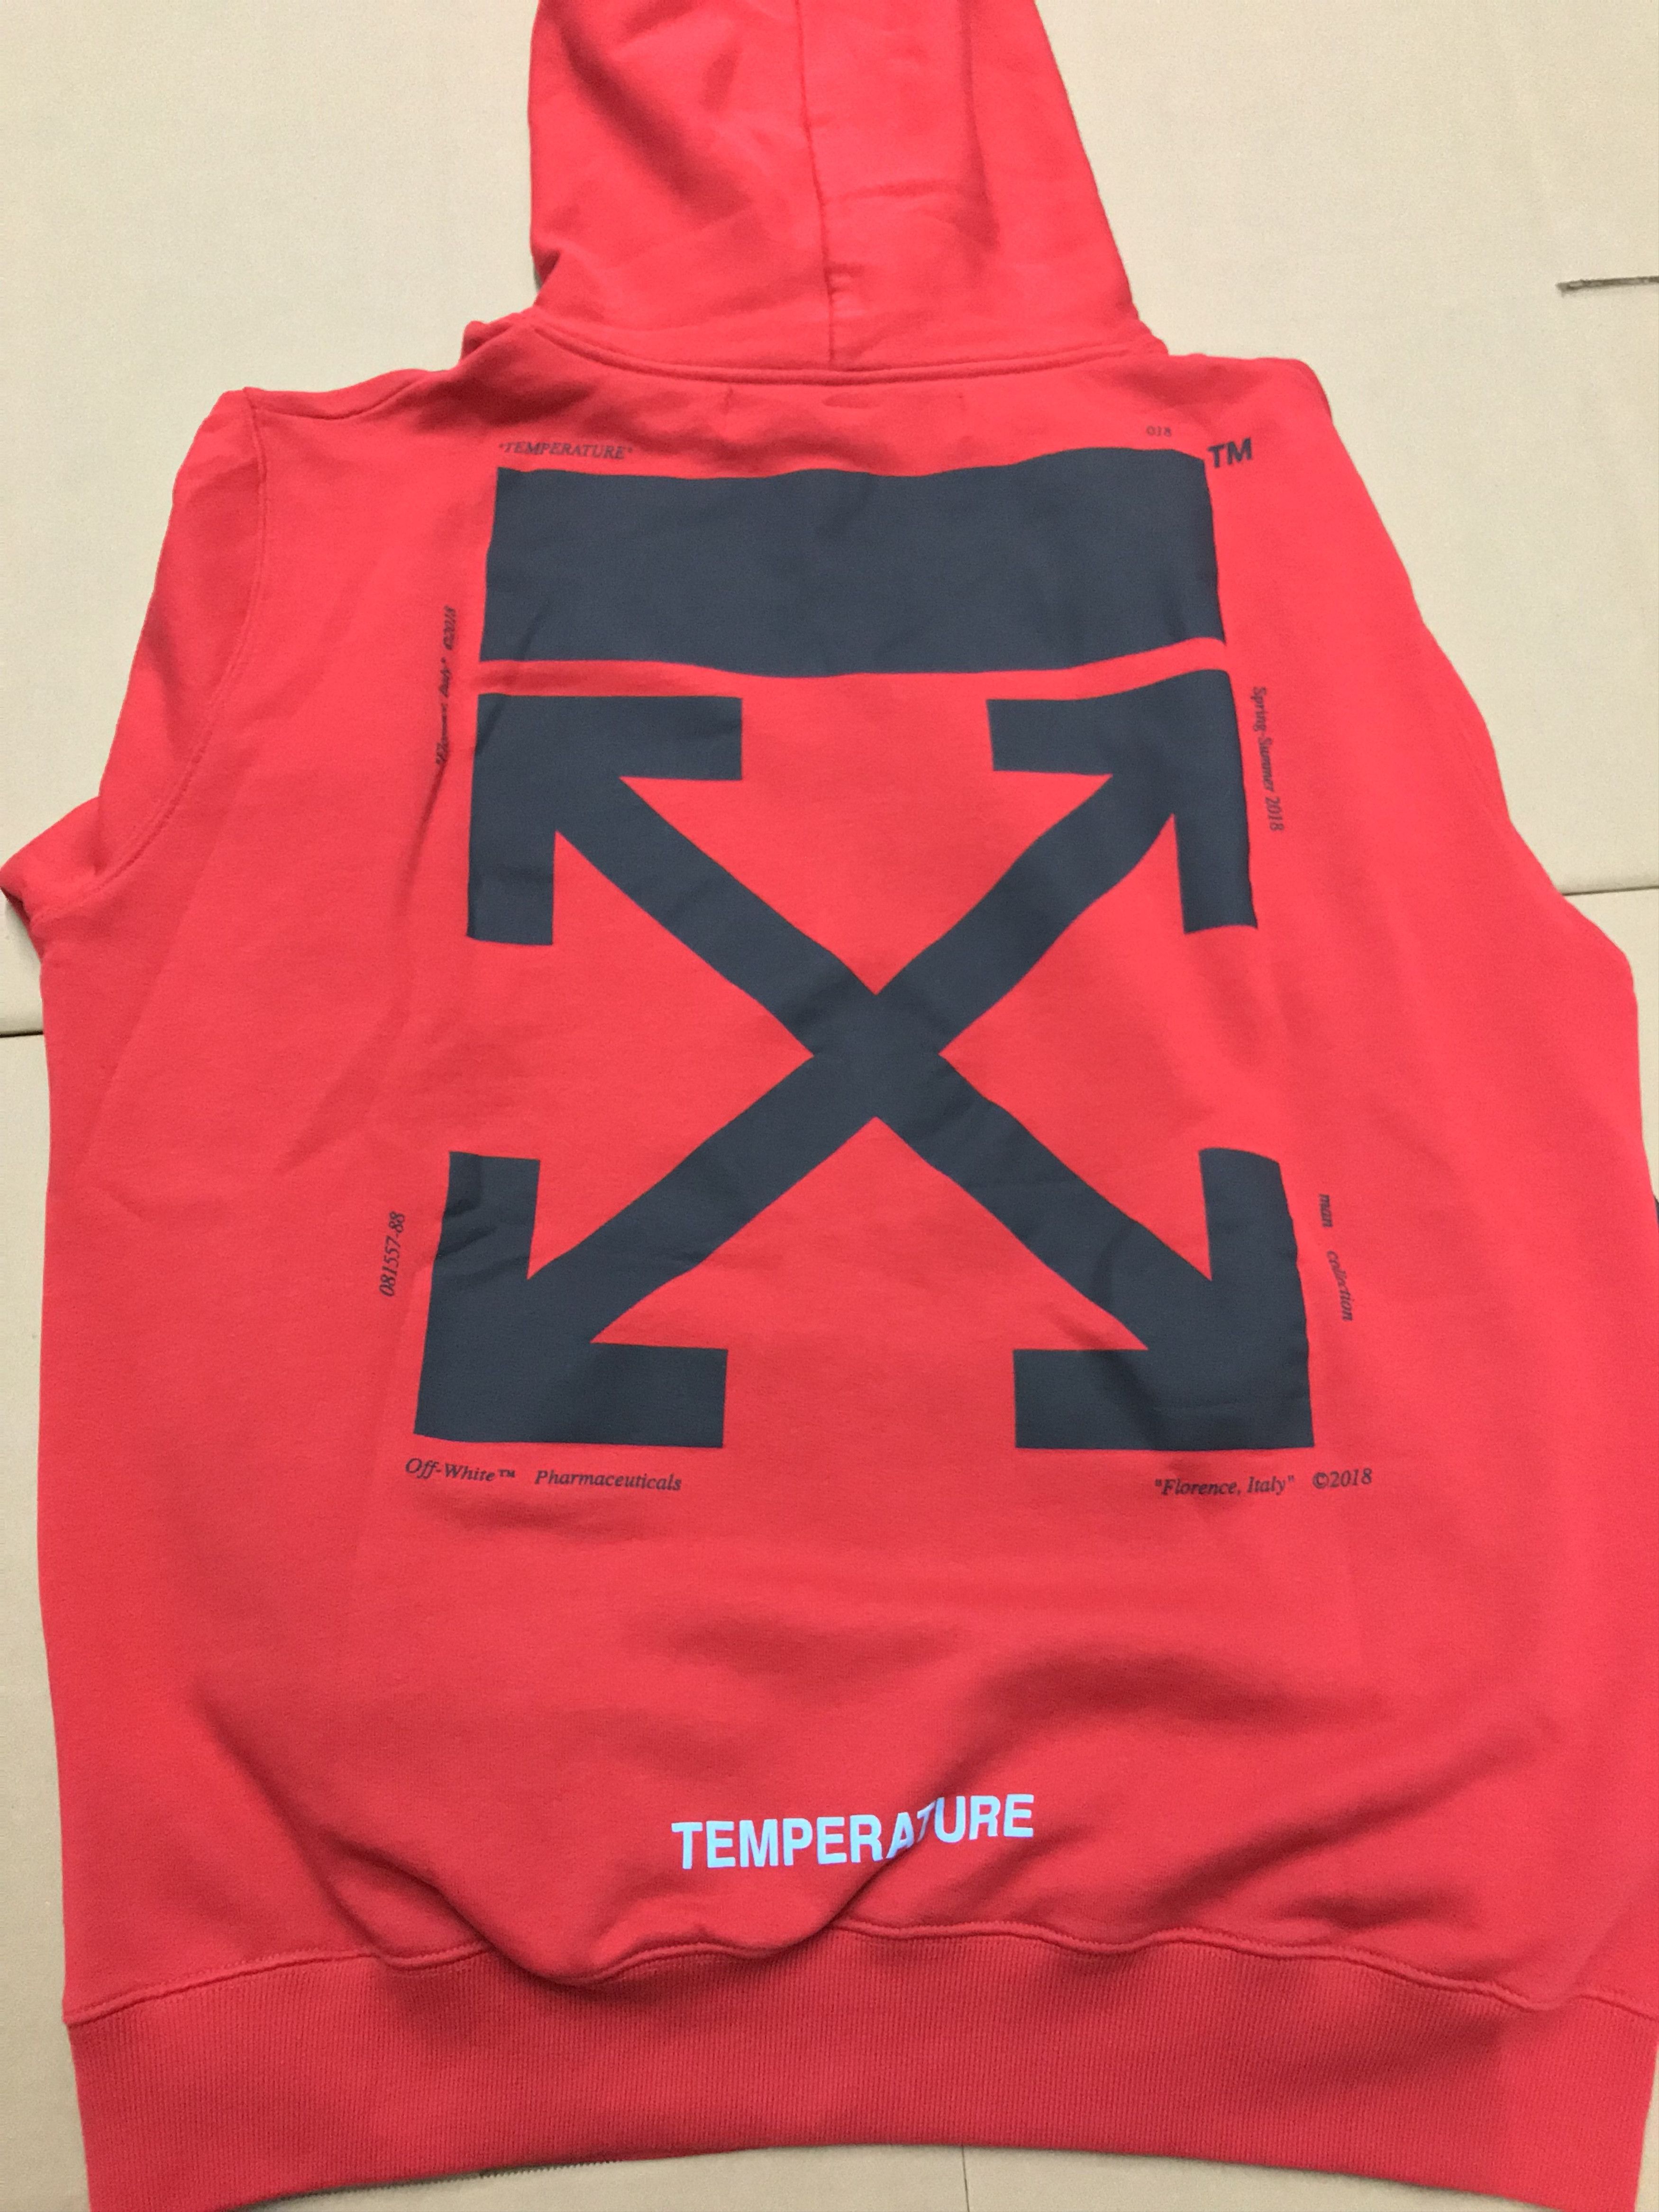 Off-White 2018 VIRGIL ABLOH OFF WHITE TEMPERATURE MONA LISA RED BLACK PULLOVER HOODIE SZ L Size US L / EU 52-54 / 3 - 2 Preview